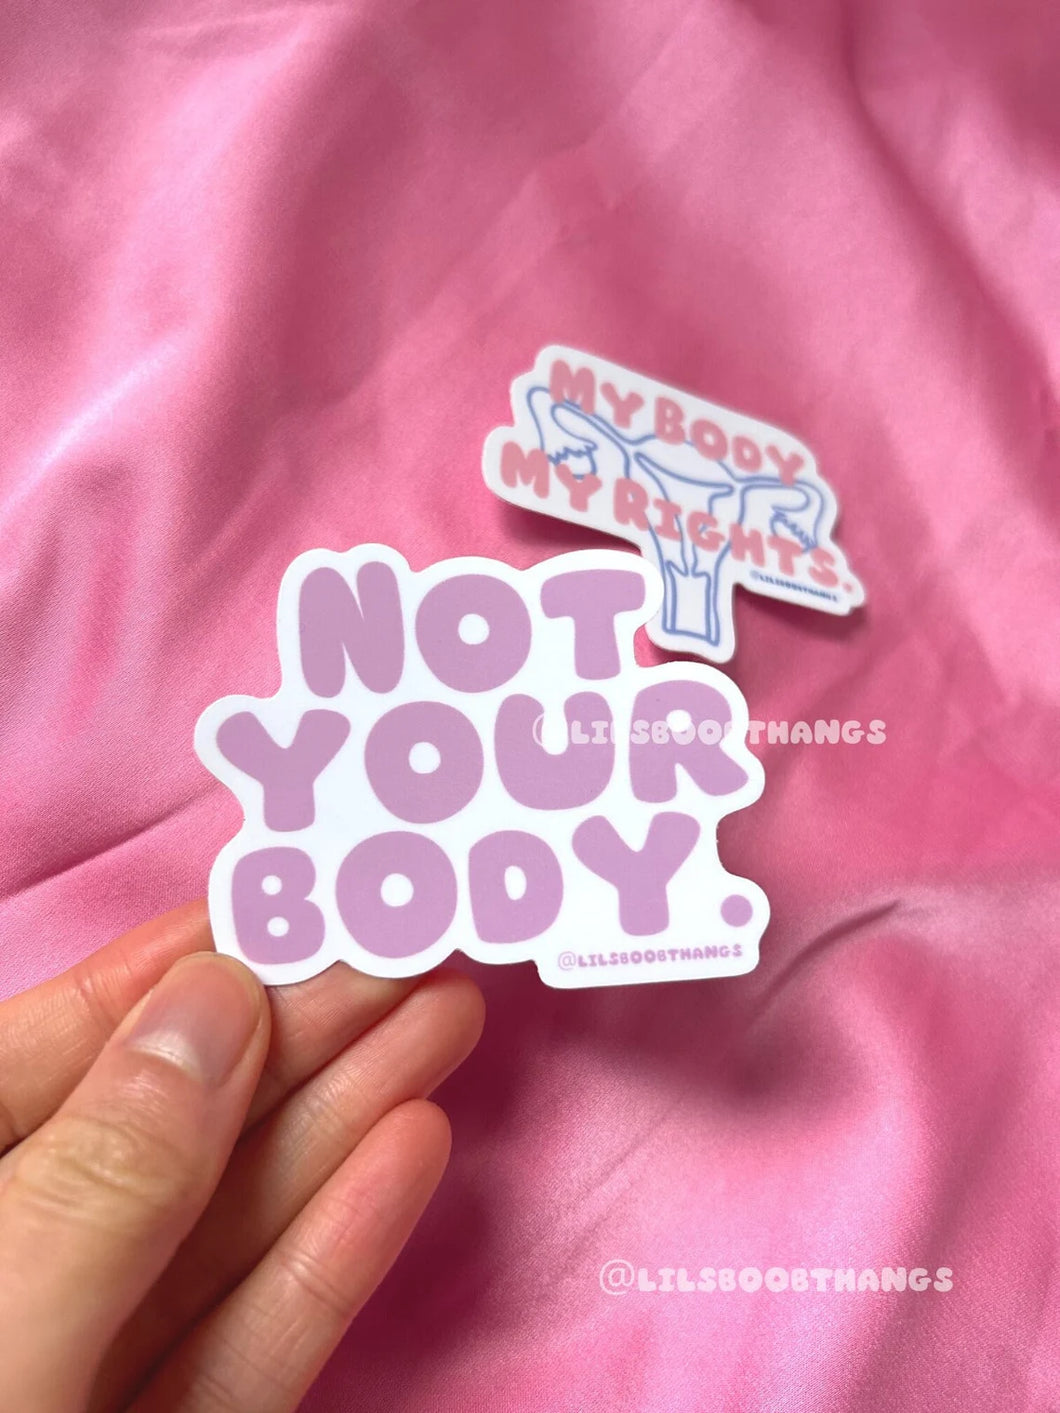 Not Your Body Sticker